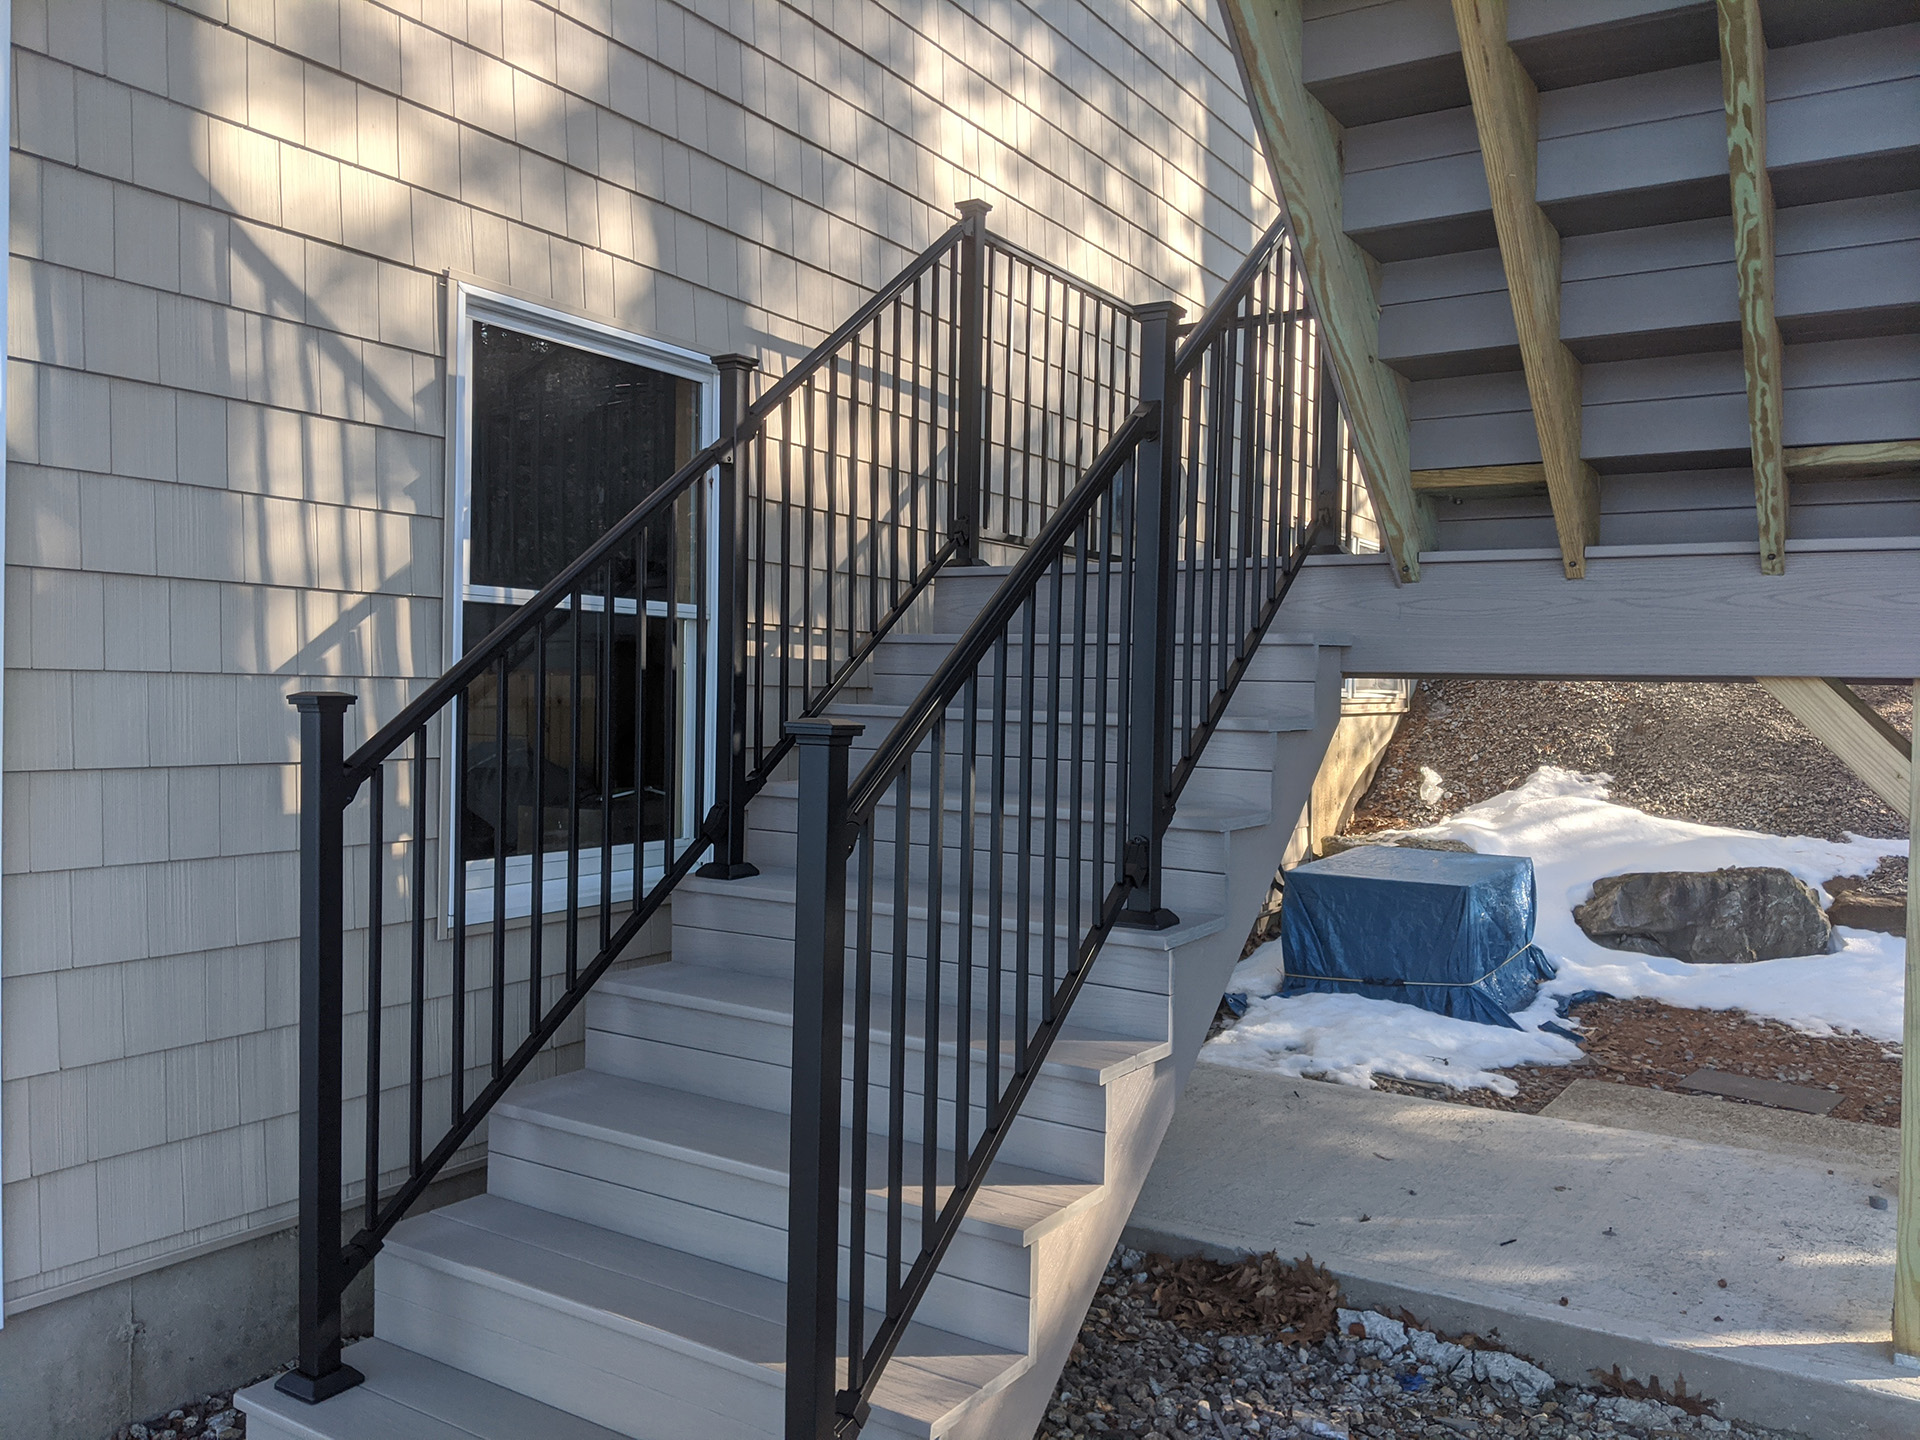 Metal railings on deck stairs with house in the background.